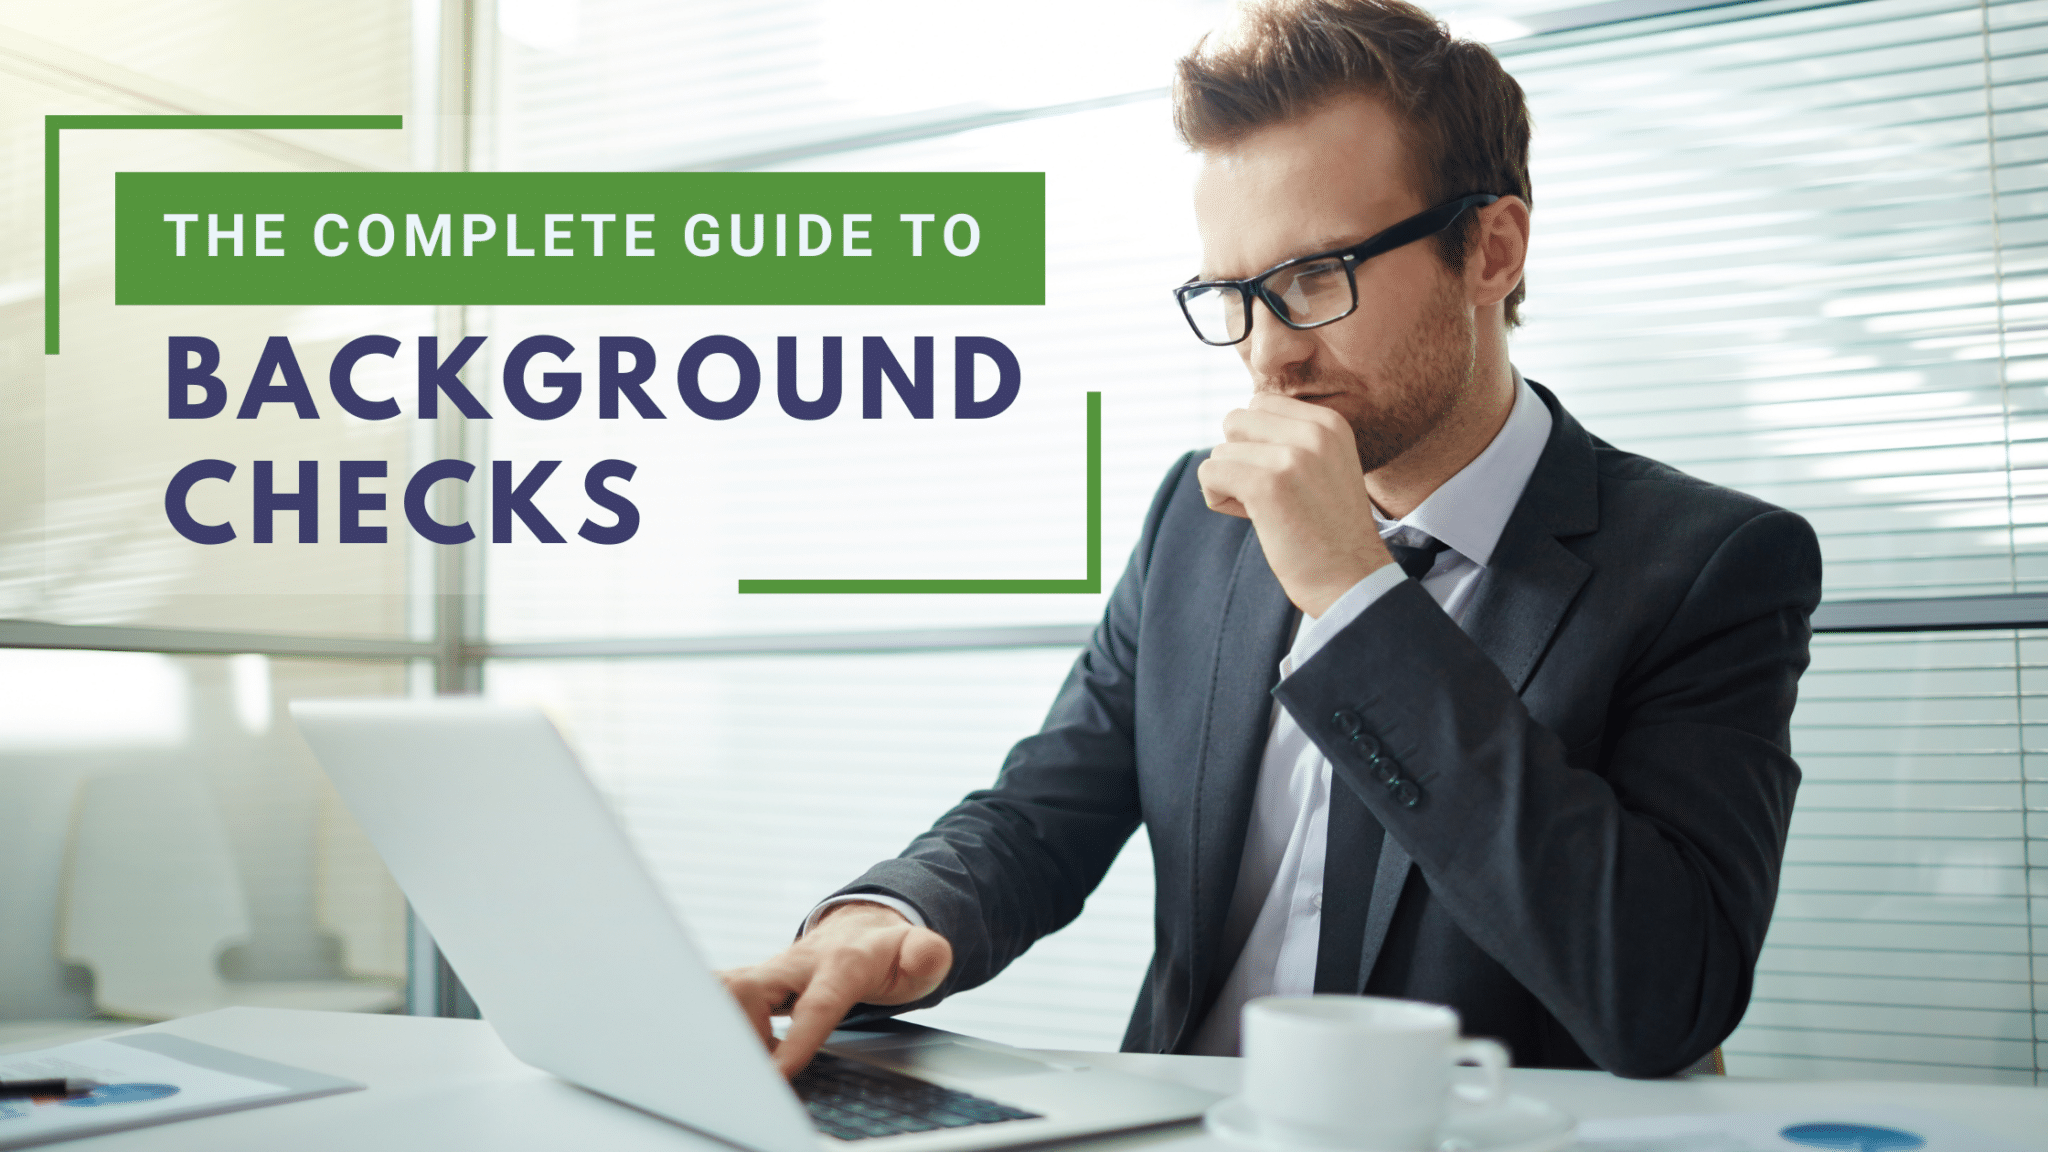 What Is A Background Check? 11 Common Background Check Types - Pre-Employ